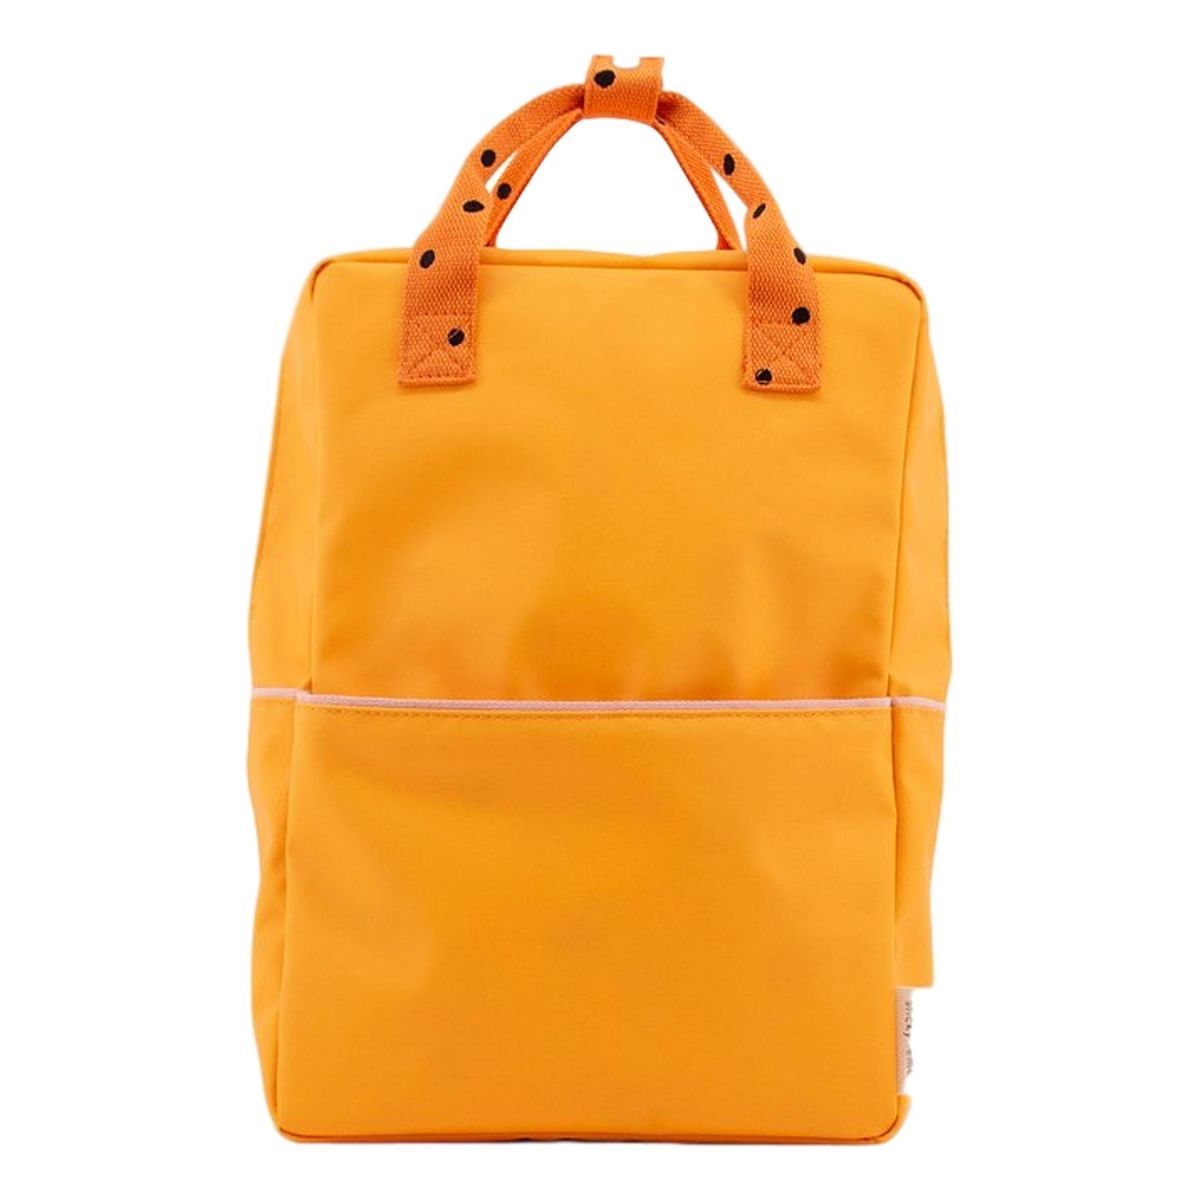 Sticky Lemon Backpack large / Freckles Sunny yellow